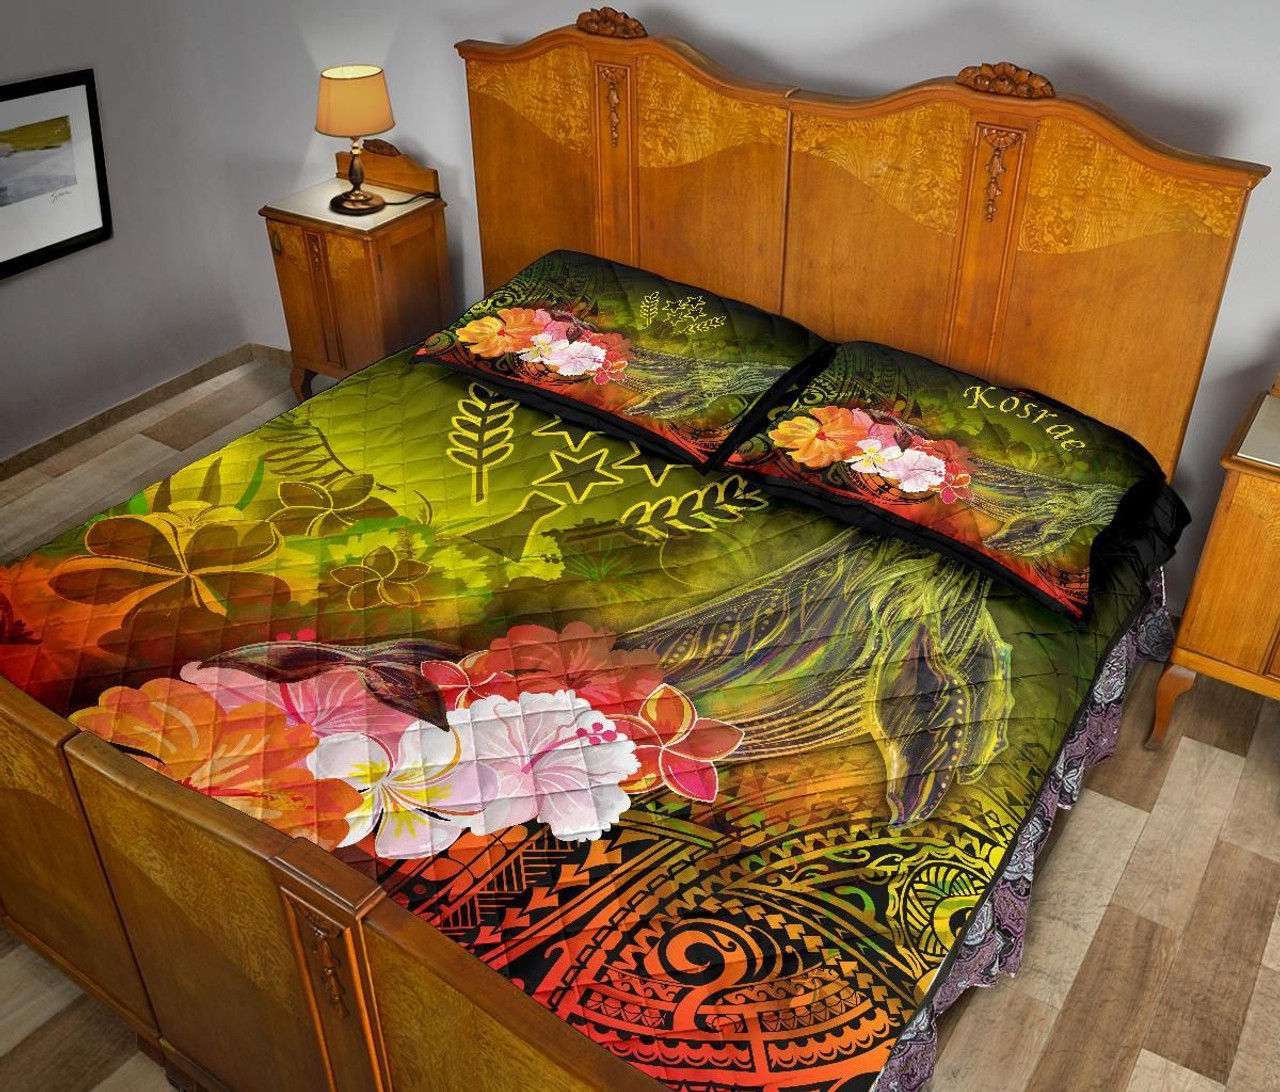 Kosrae Quilt Bed Set - Humpback Whale with Tropical Flowers (Yellow) 4